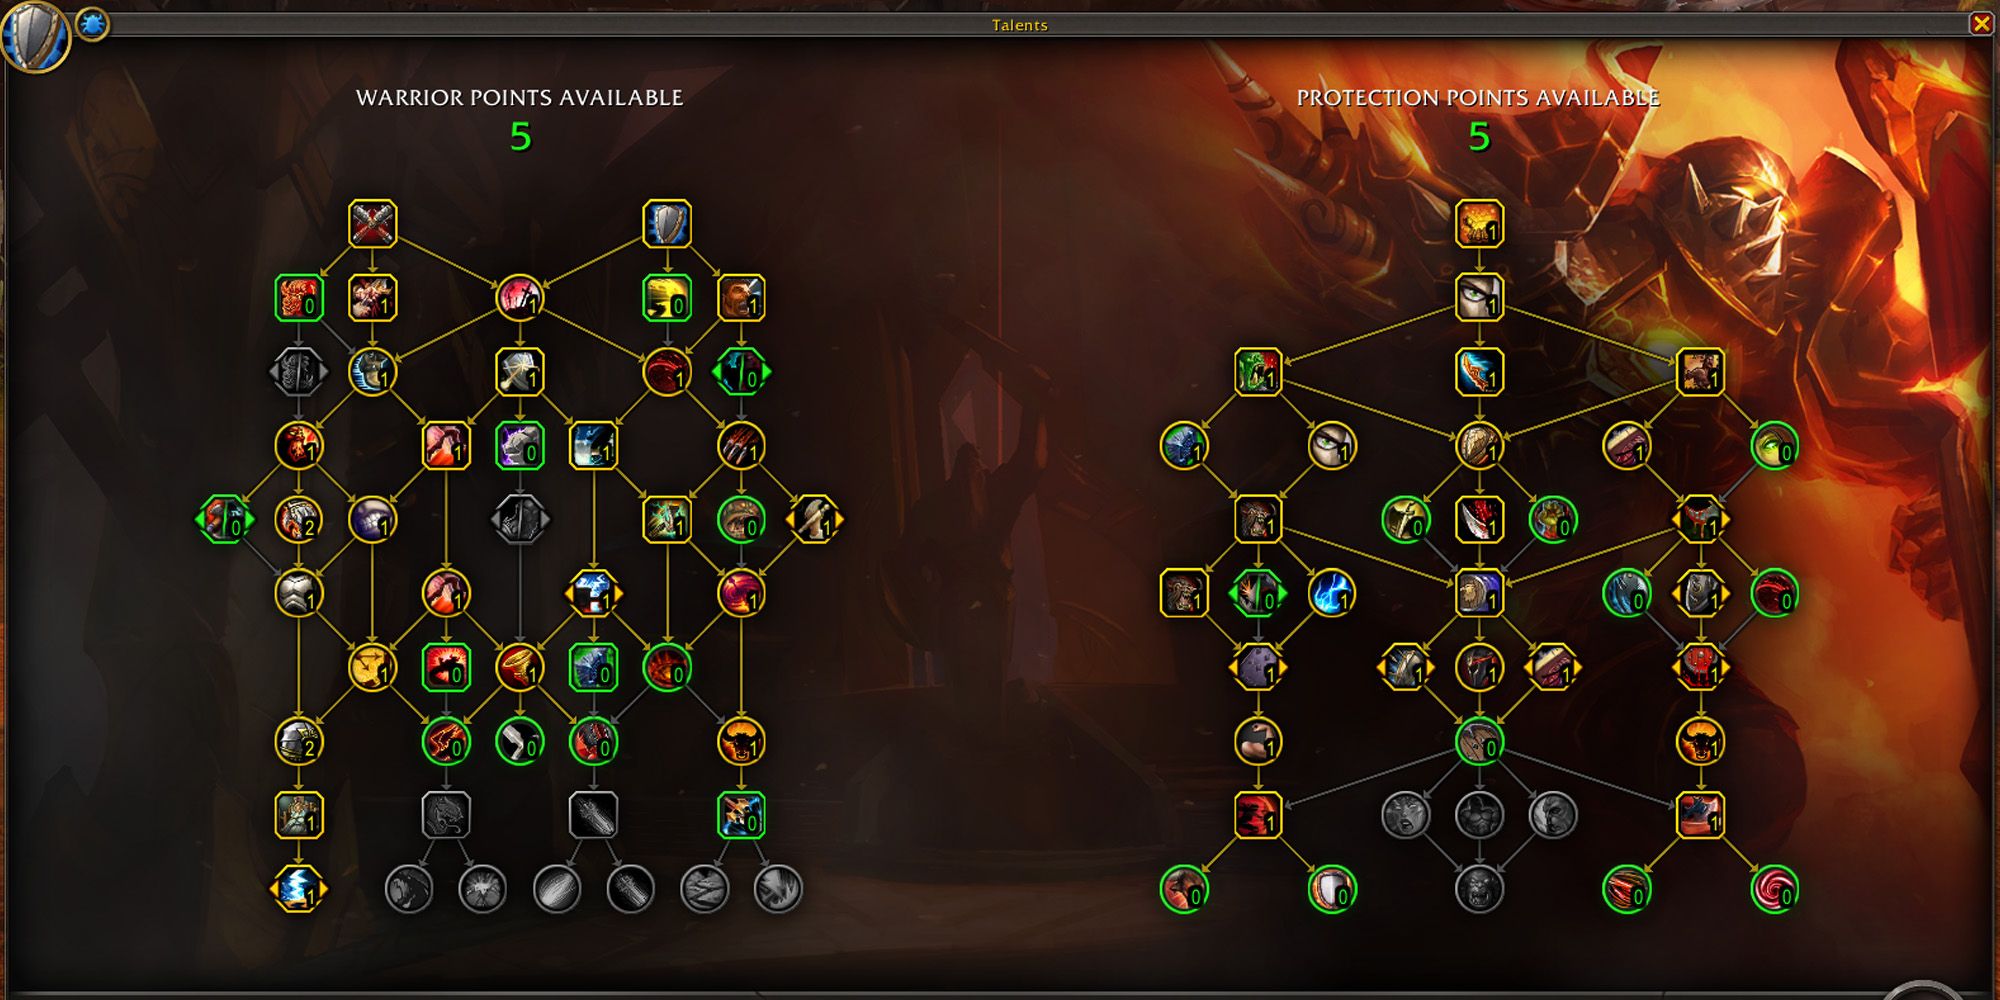 mythic+protection warrior talents